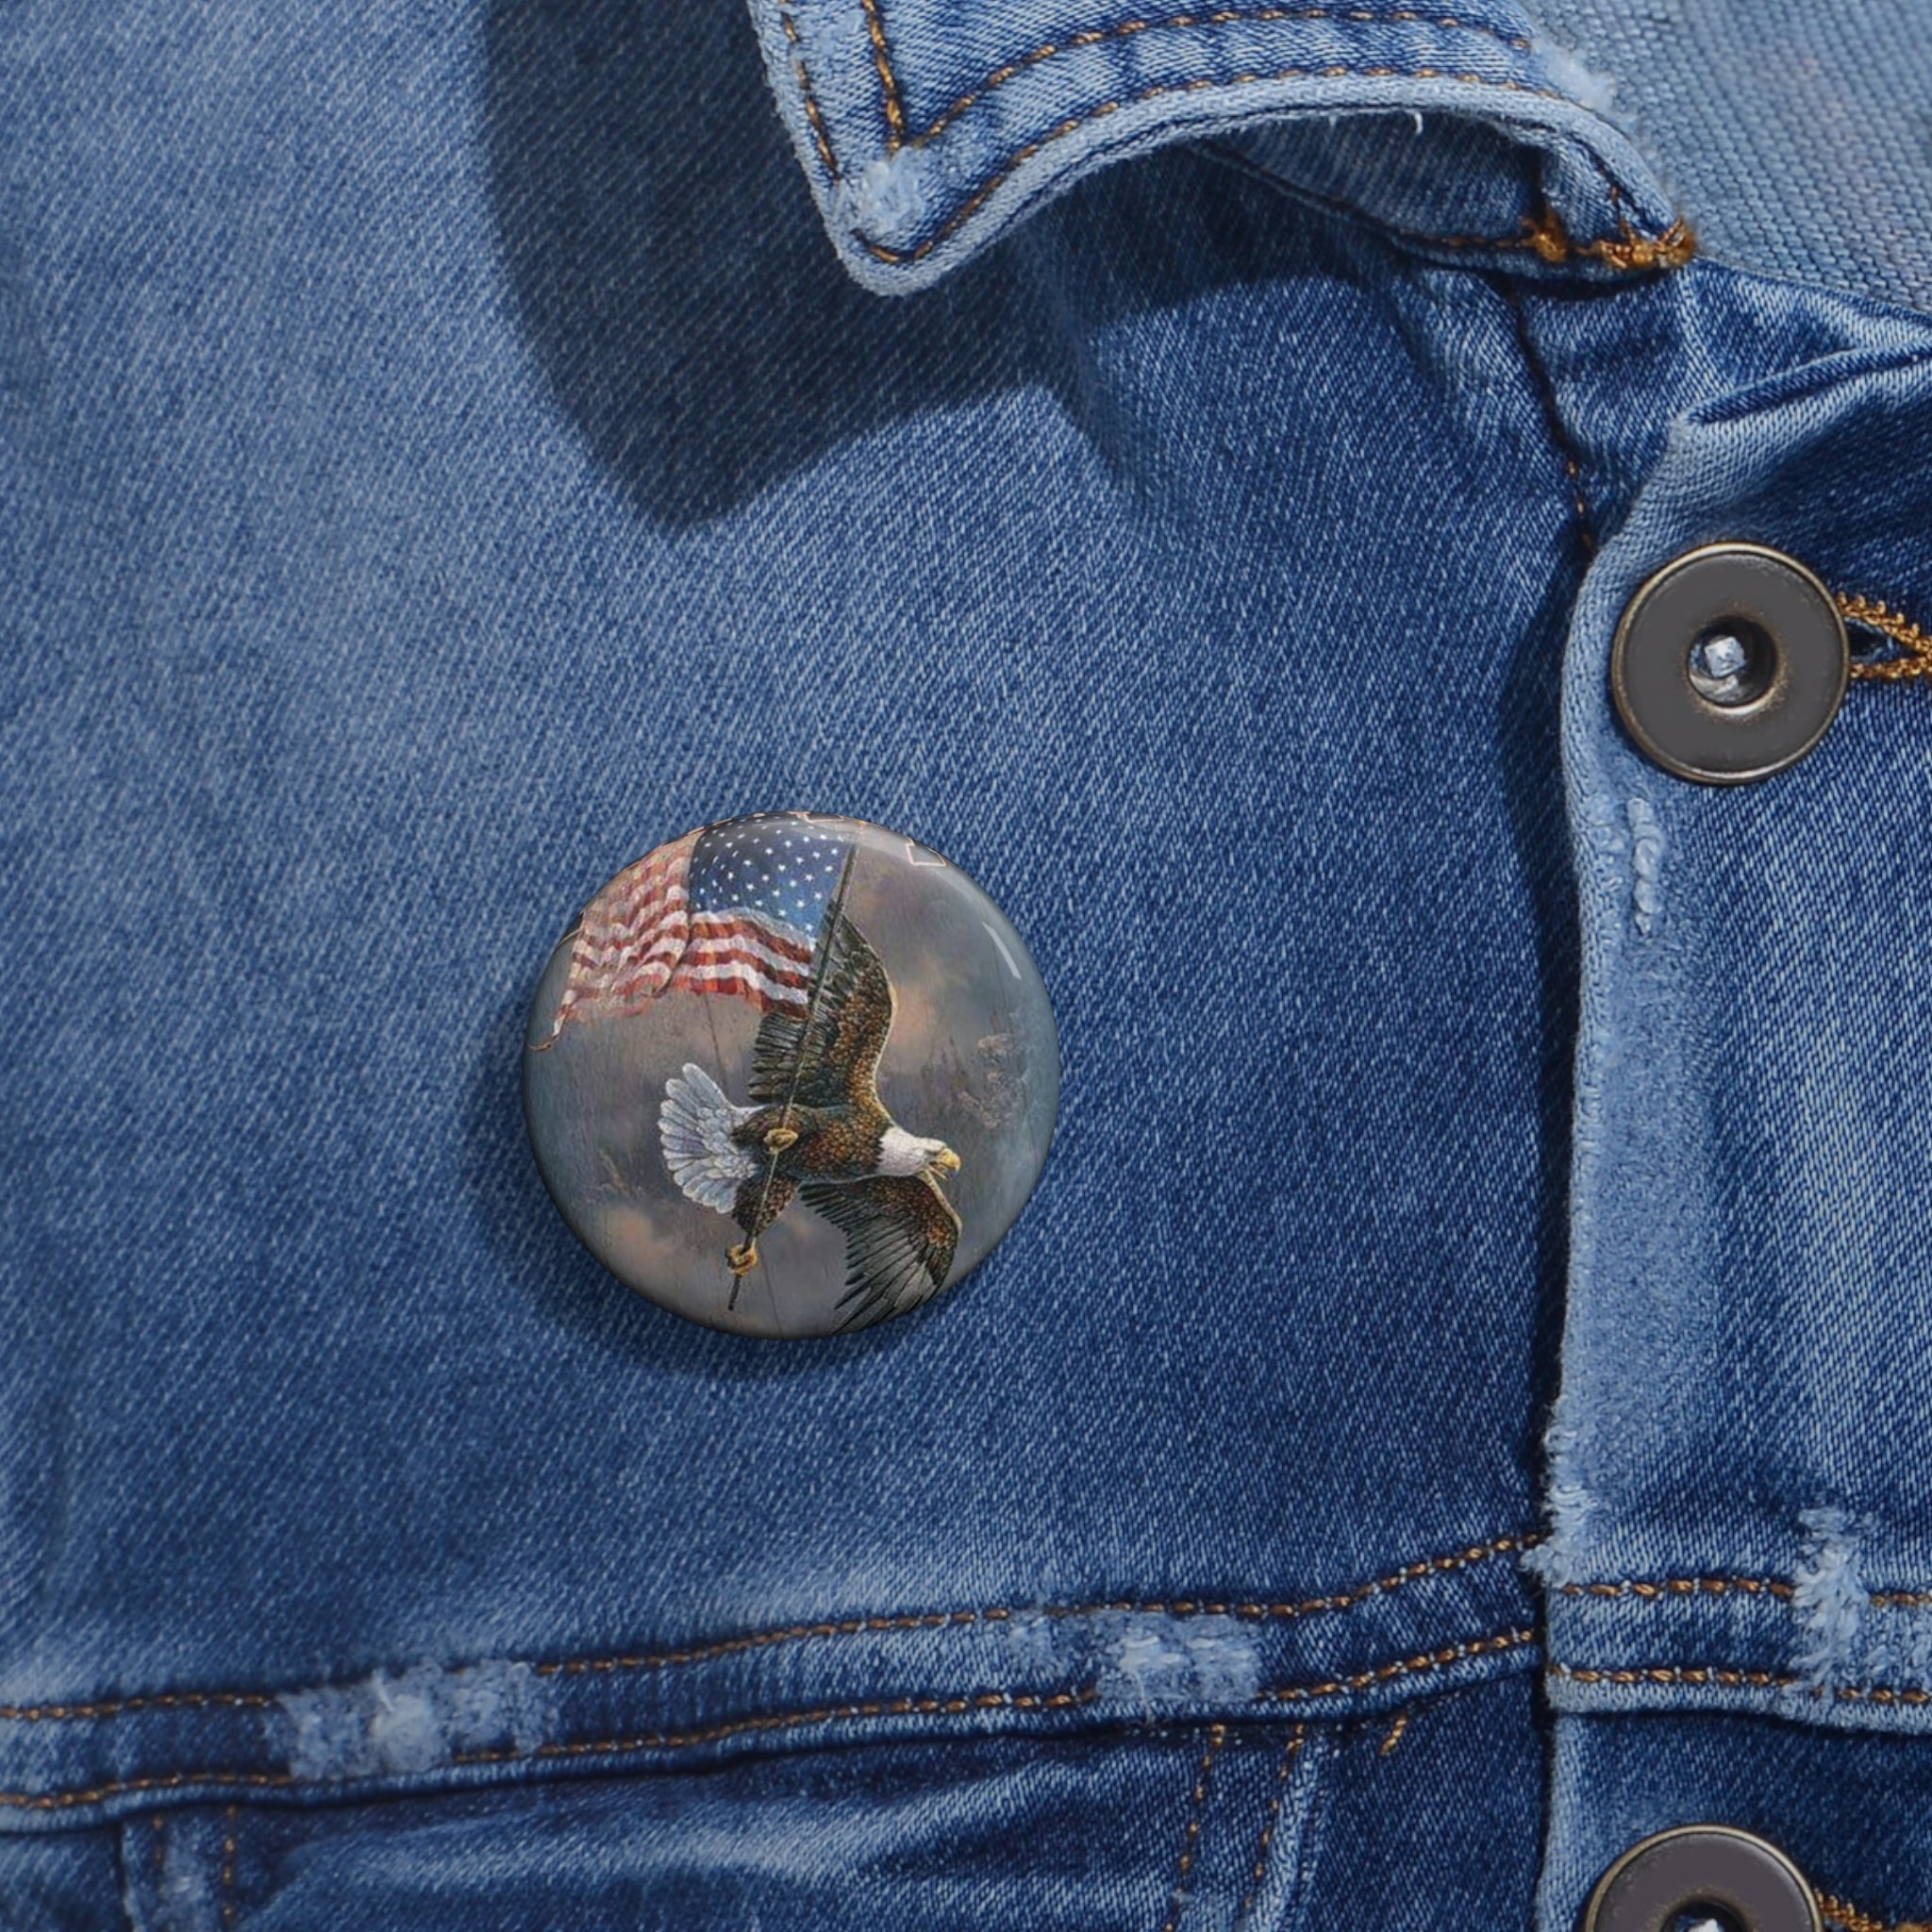 Bargain Deals On Wholesale custom jean buttons For DIY Crafts And Sewing -  Alibaba.com